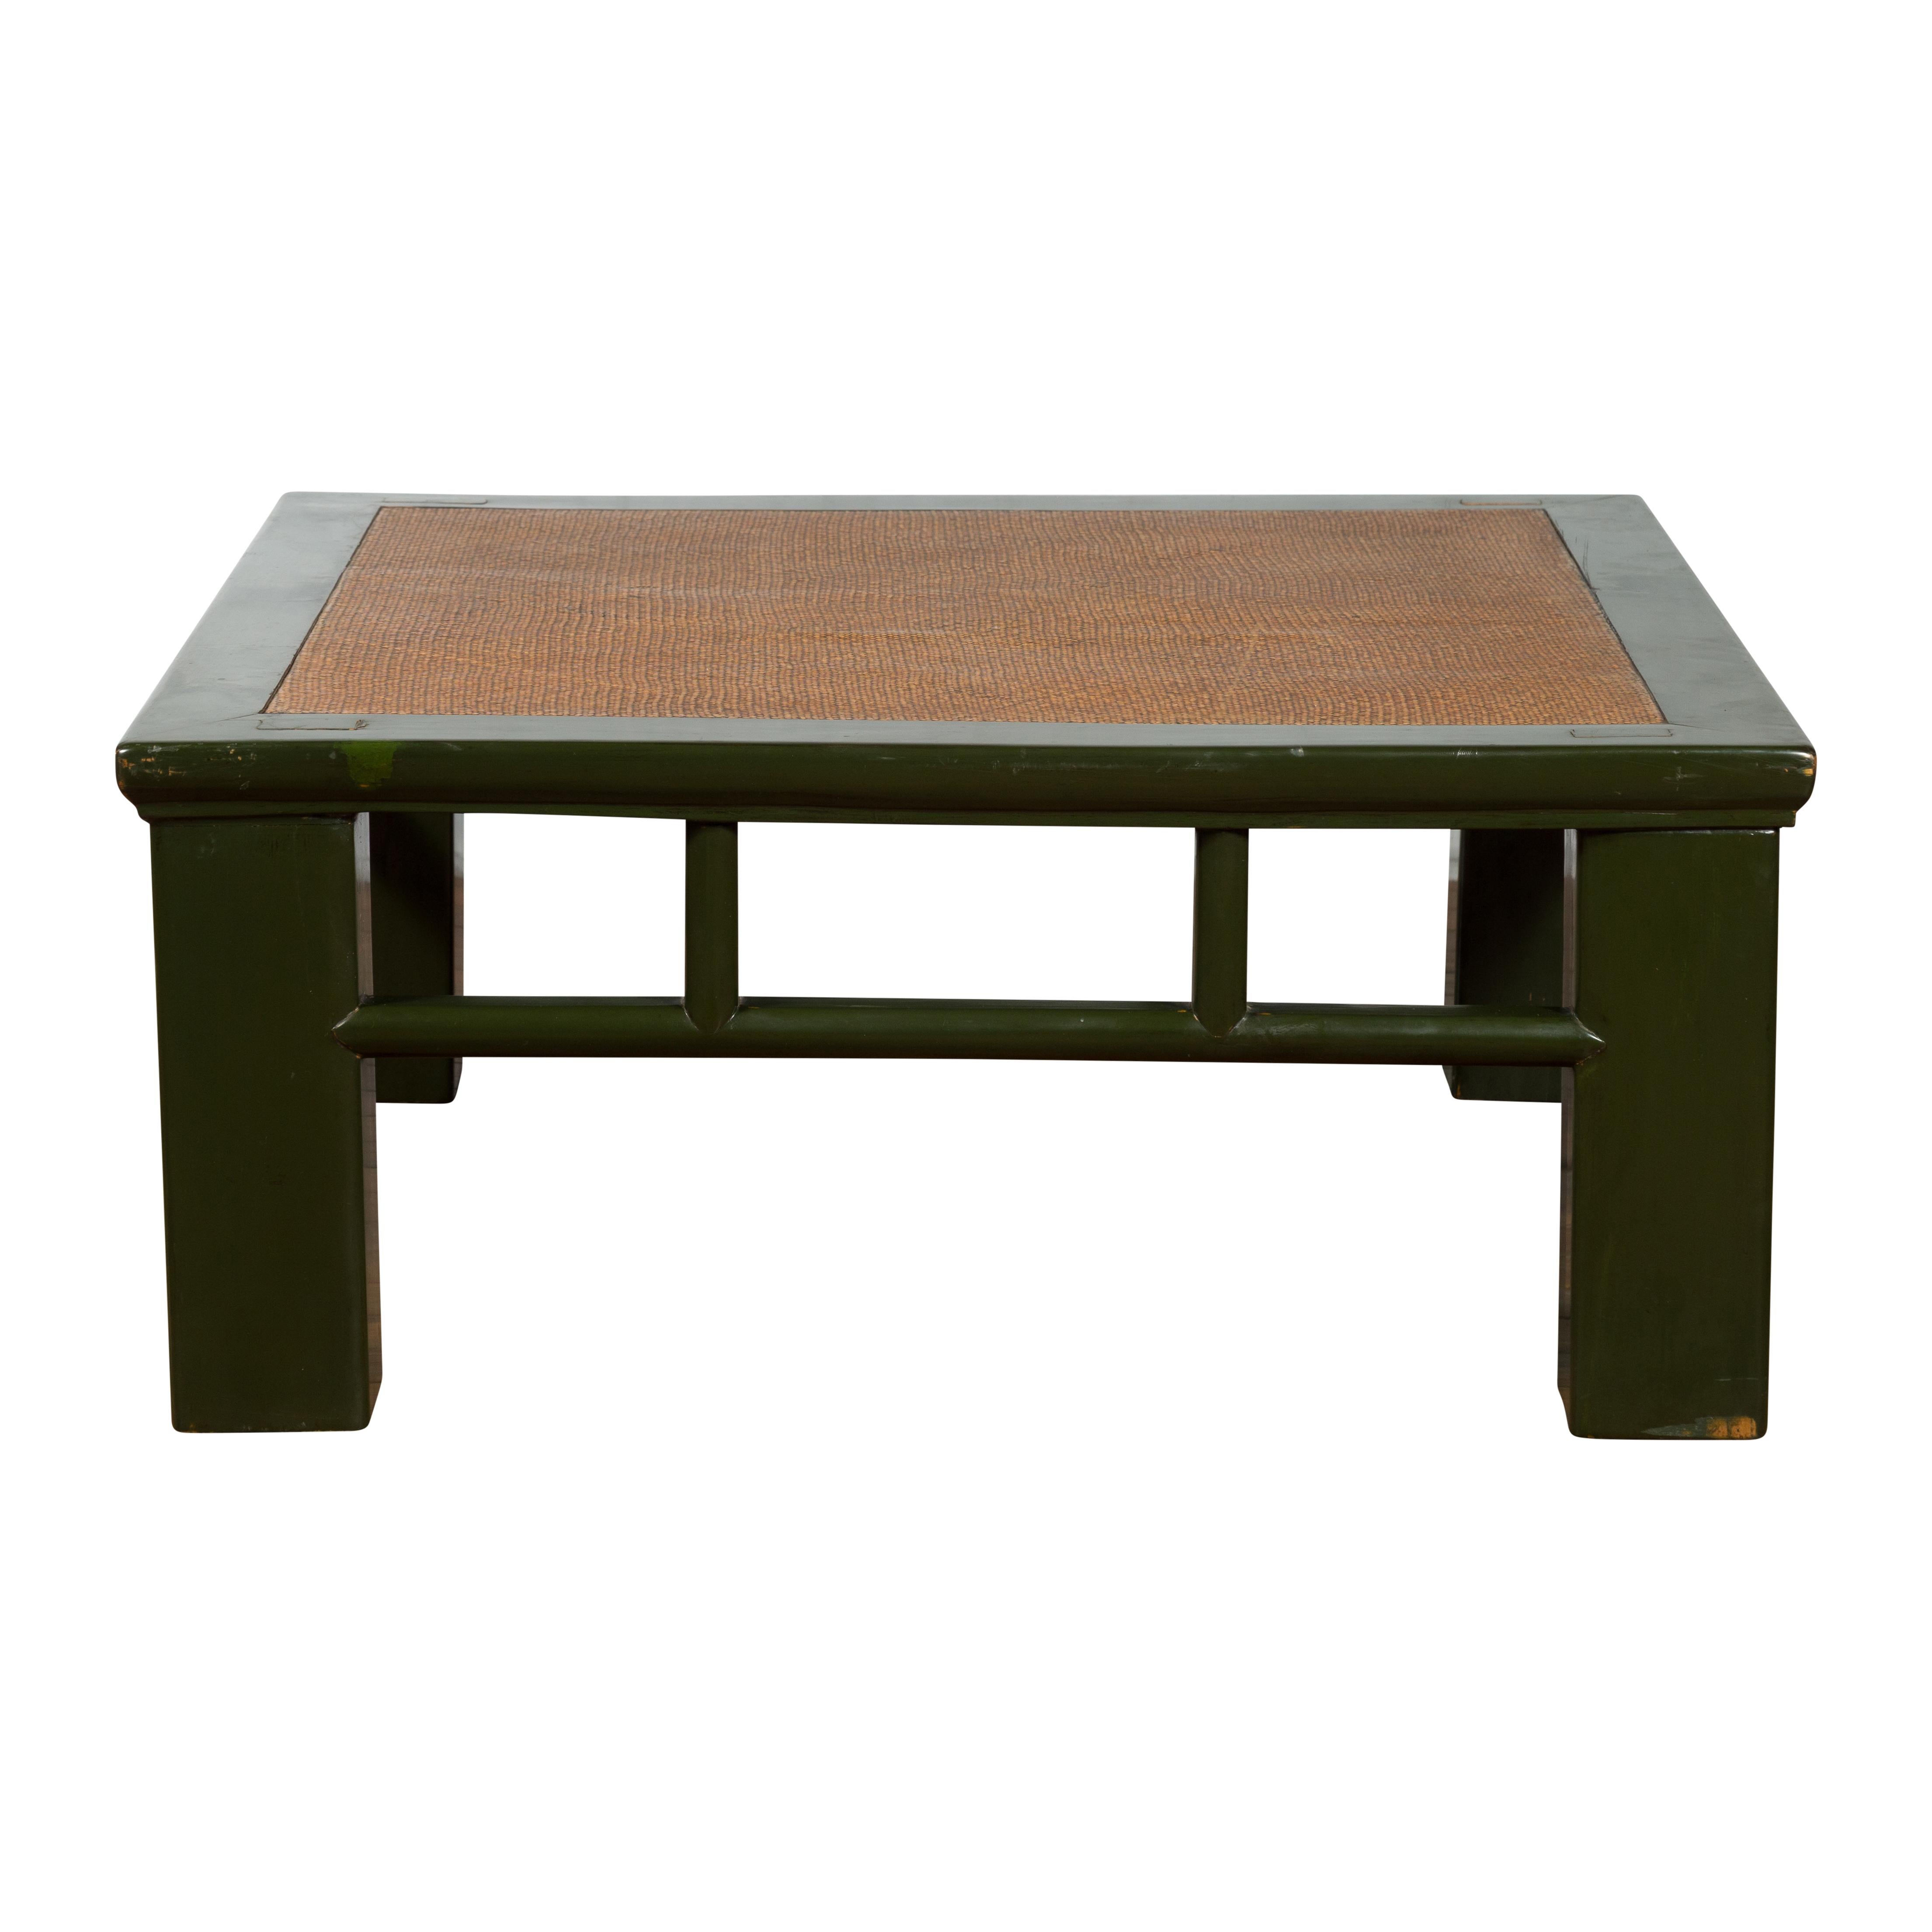 An antique Chinese late Qing Dynasty period wooden coffee table from the early 20th century, with green lacquer, hand-woven rattan top inset, square legs, open apron and pillar strut motifs. Created in China, this low table was originally made from